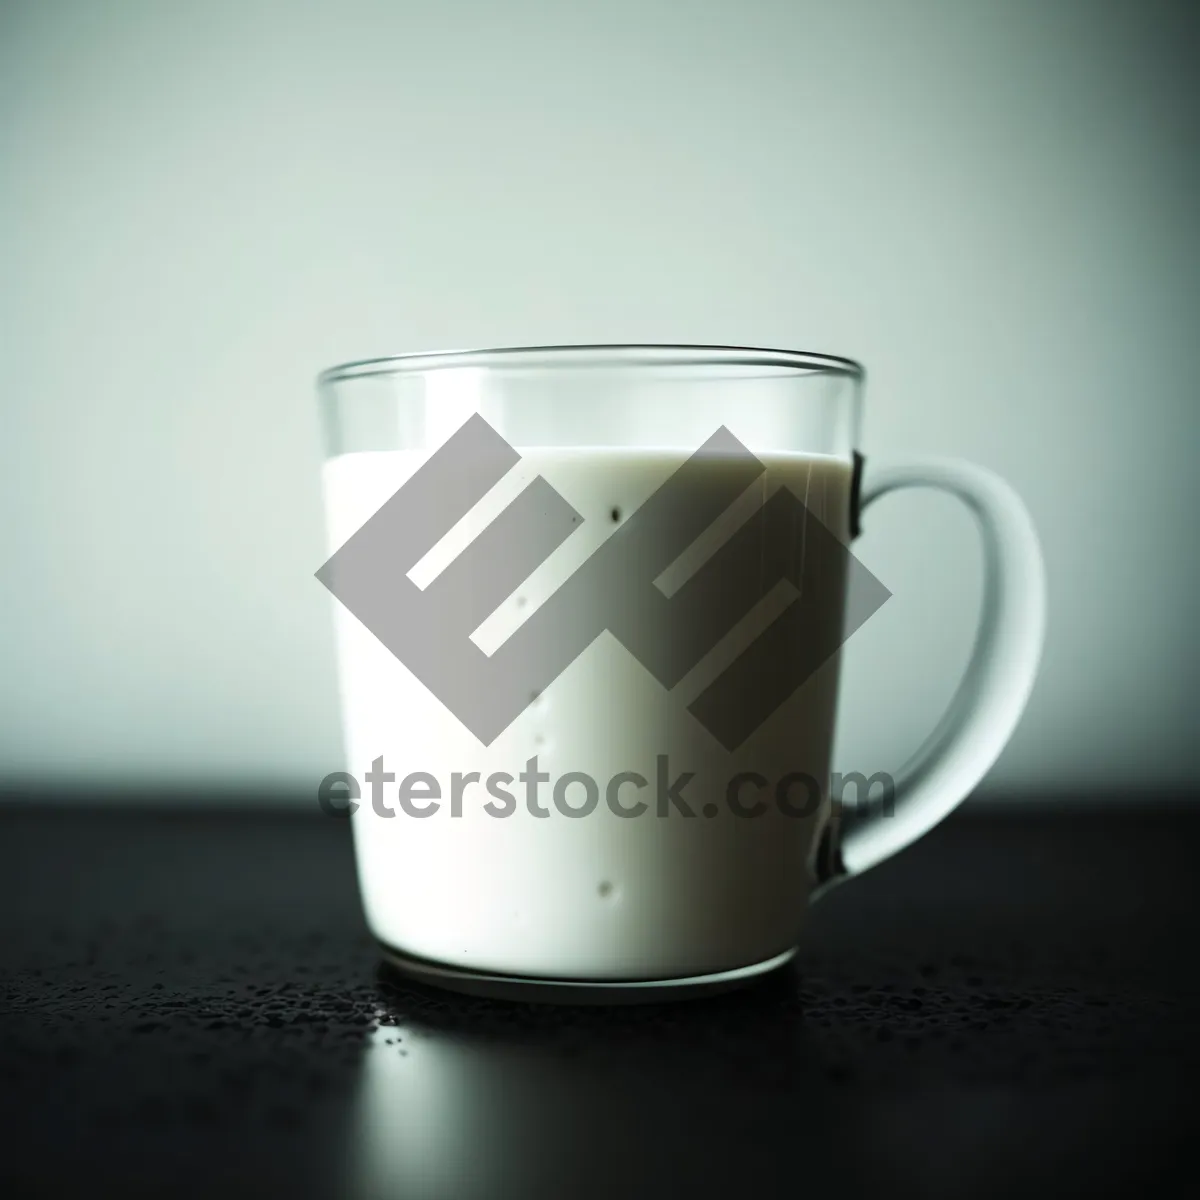 Picture of Hot Coffee in Black Mug with Saucer on Table